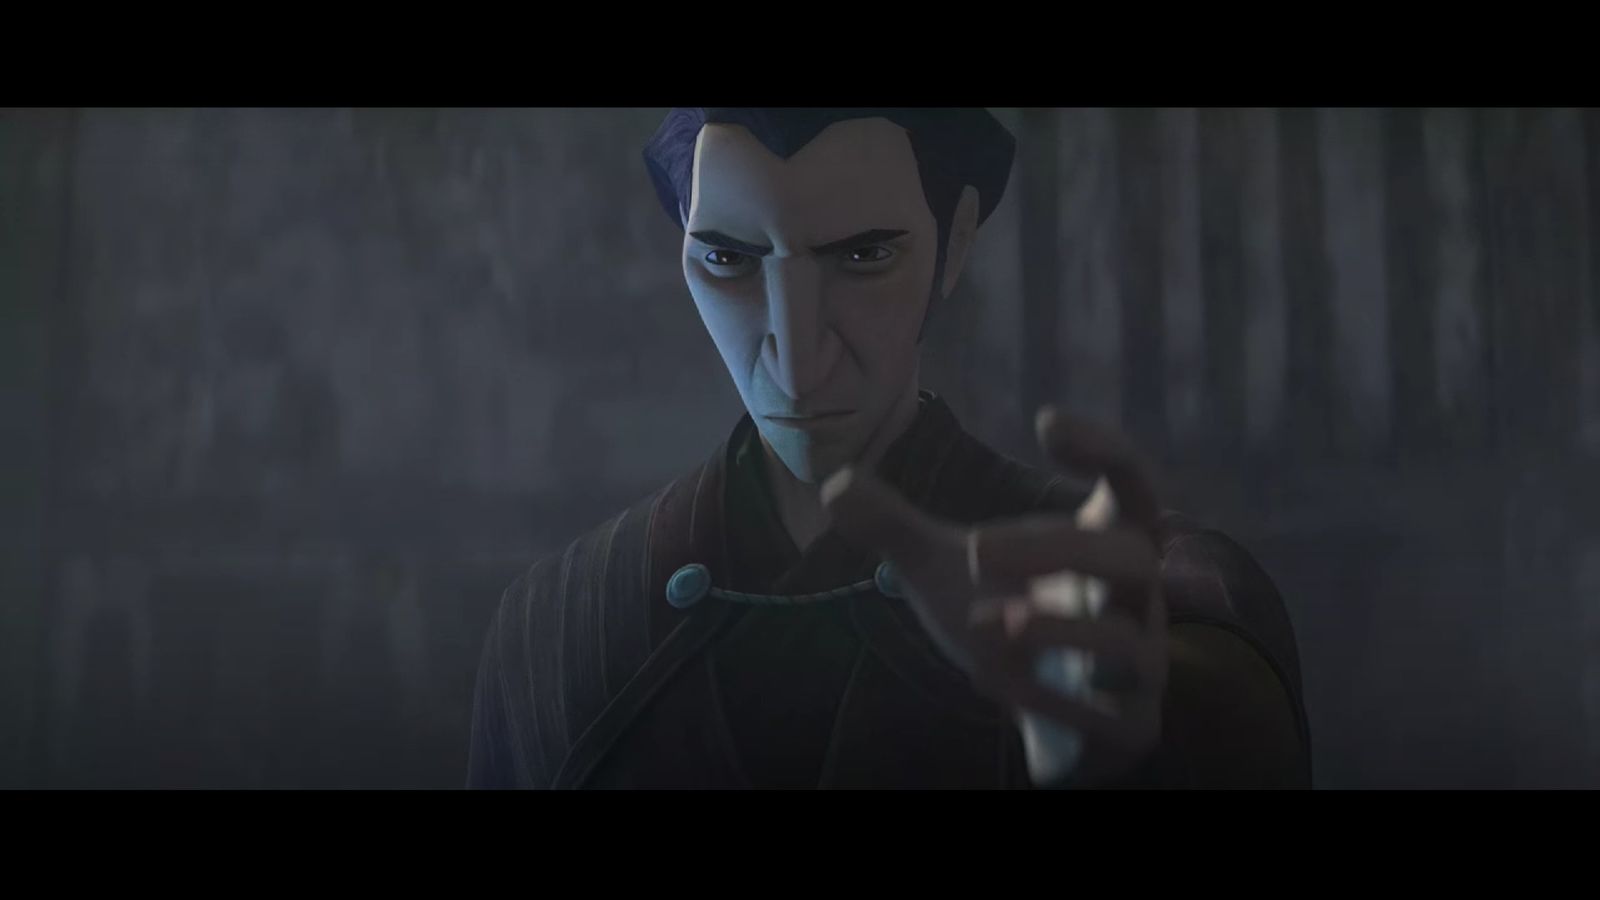 Count Doku in Star Wars: Tales of the Jedi